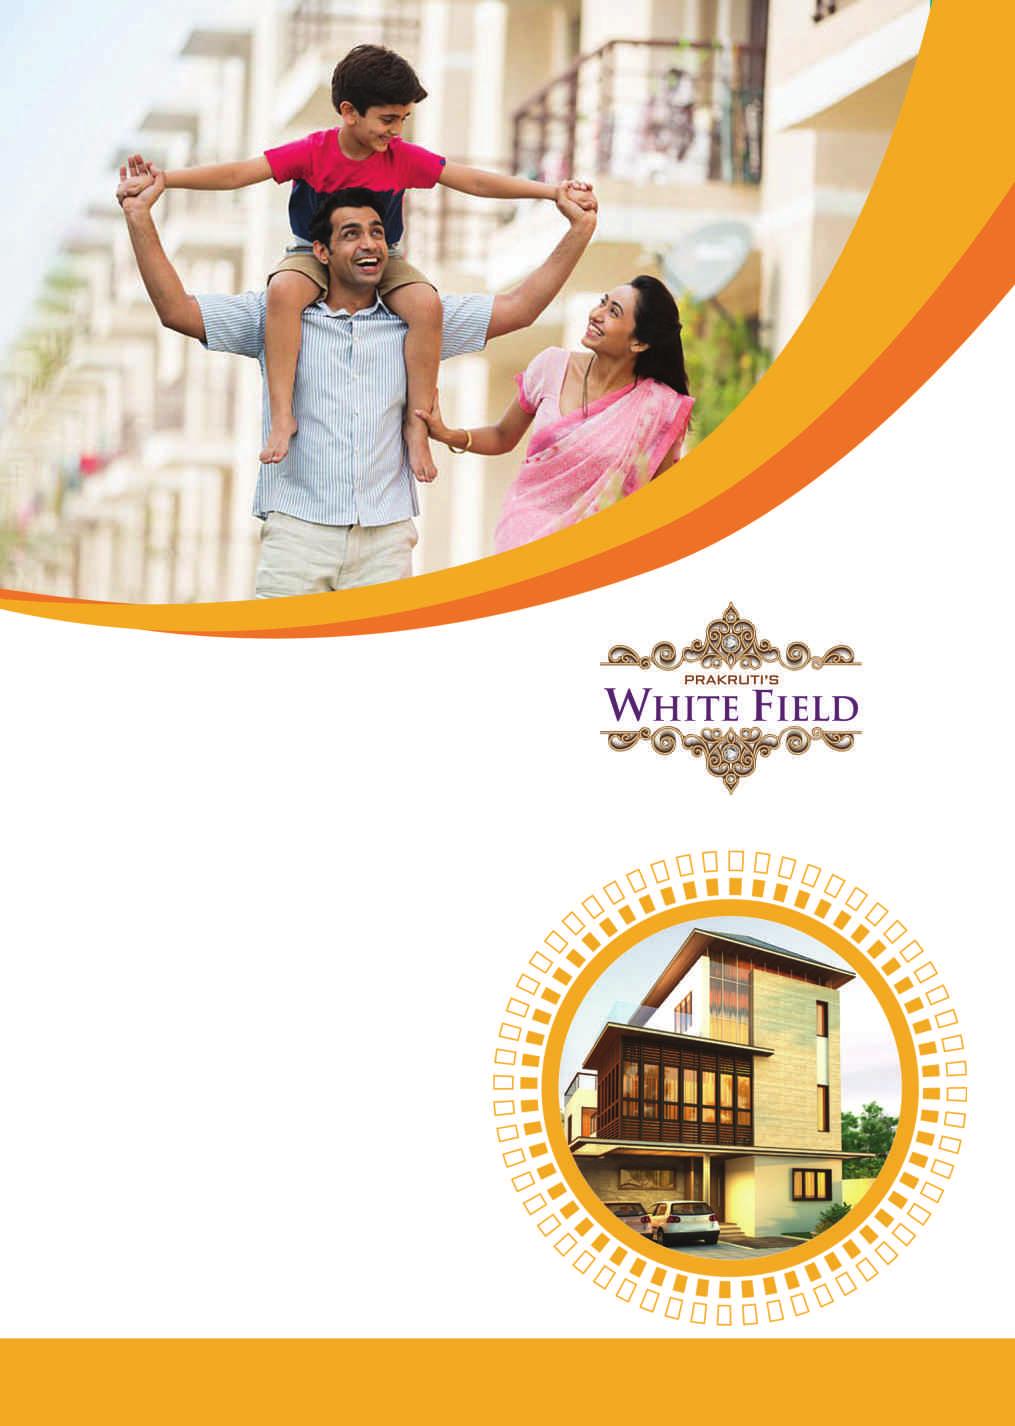 About The Venture Prakruti Avenues Pvt Ltd. Is Launching its prestigious venture White Field is our New DTCP Proposed venture for Residential Township at Shadnagar, Ranga Reddy District, Telangana.